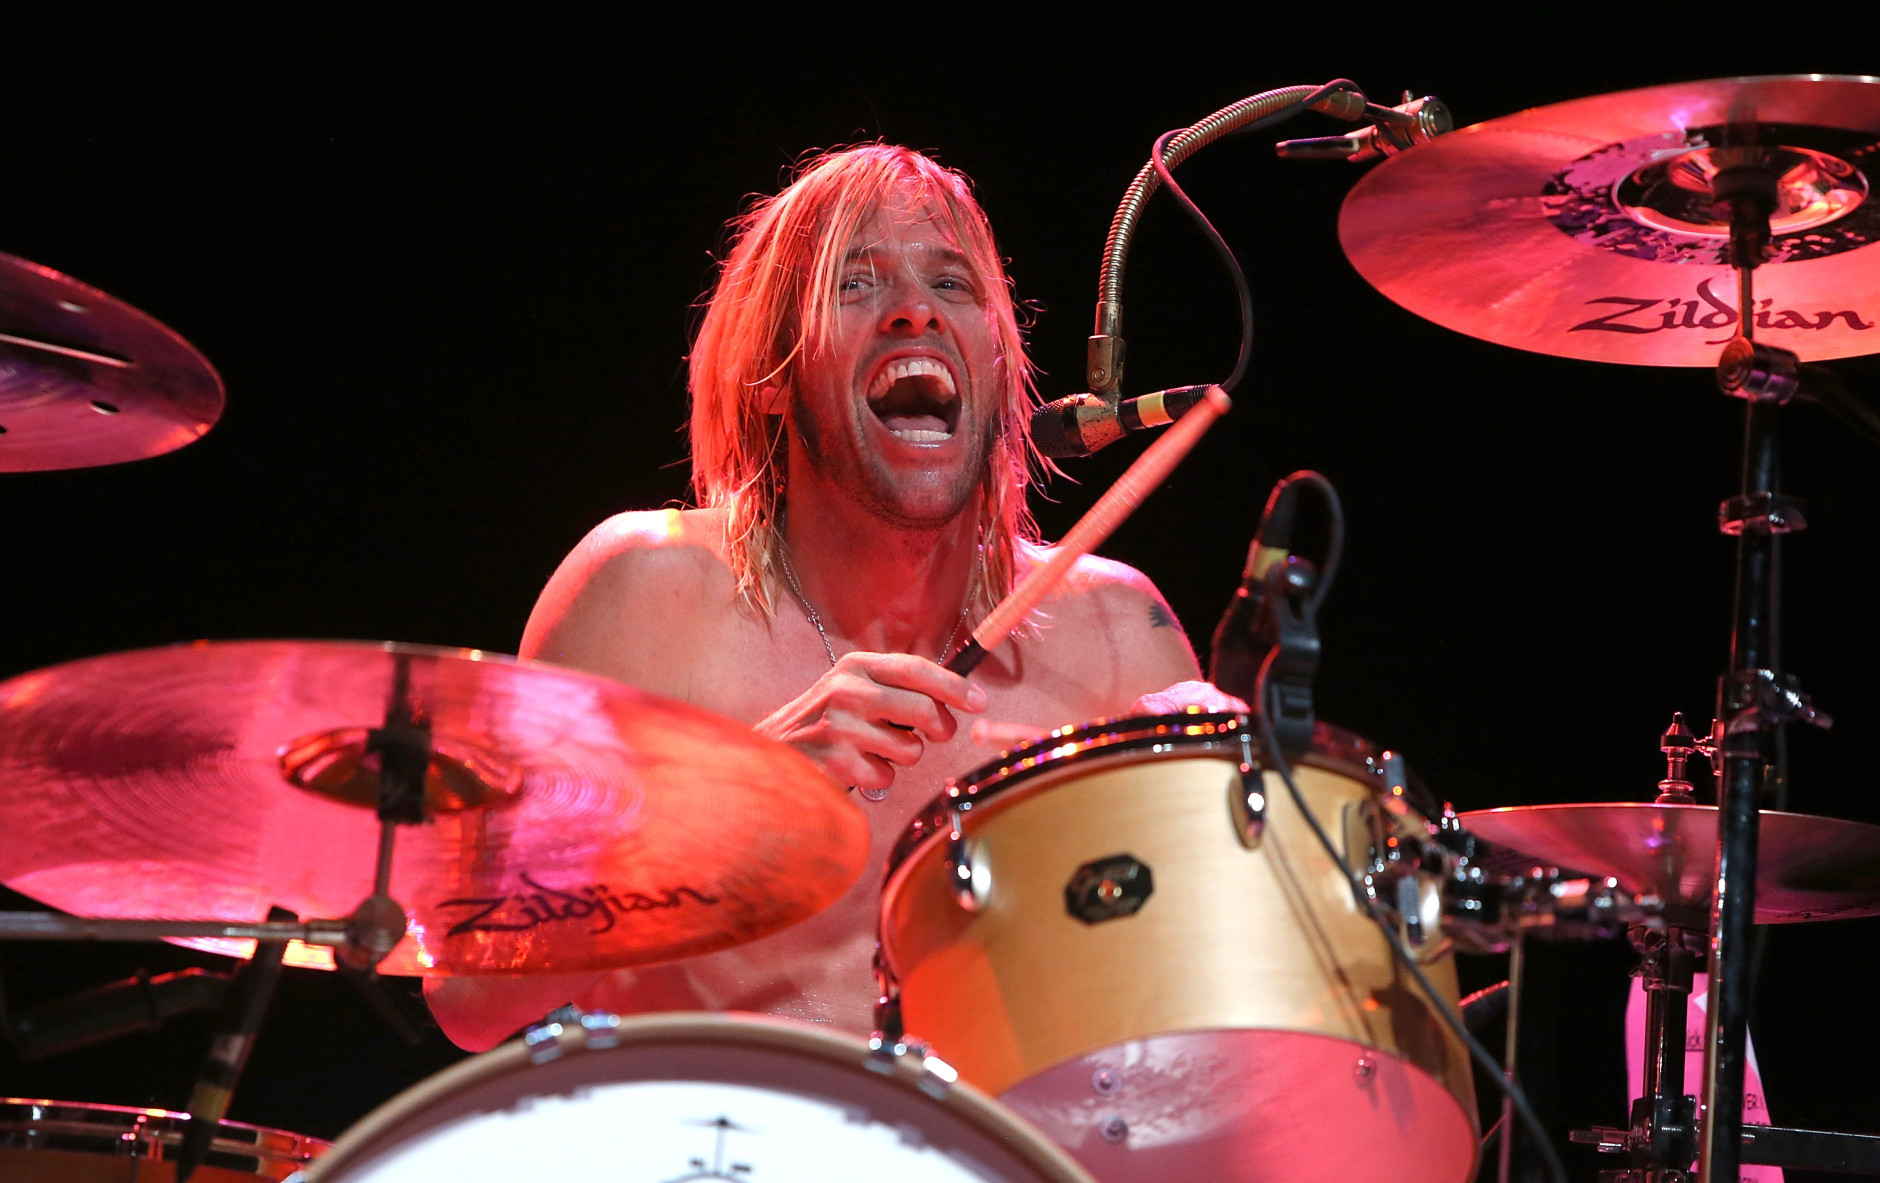 NEW YORK, NY - FEBRUARY 13:  Drummer Taylor Hawkins of the Sound City Players performs at Hammerstein Ballroom on February 13, 2013 in New York City.  (Photo by Mike Lawrie/Getty Images)